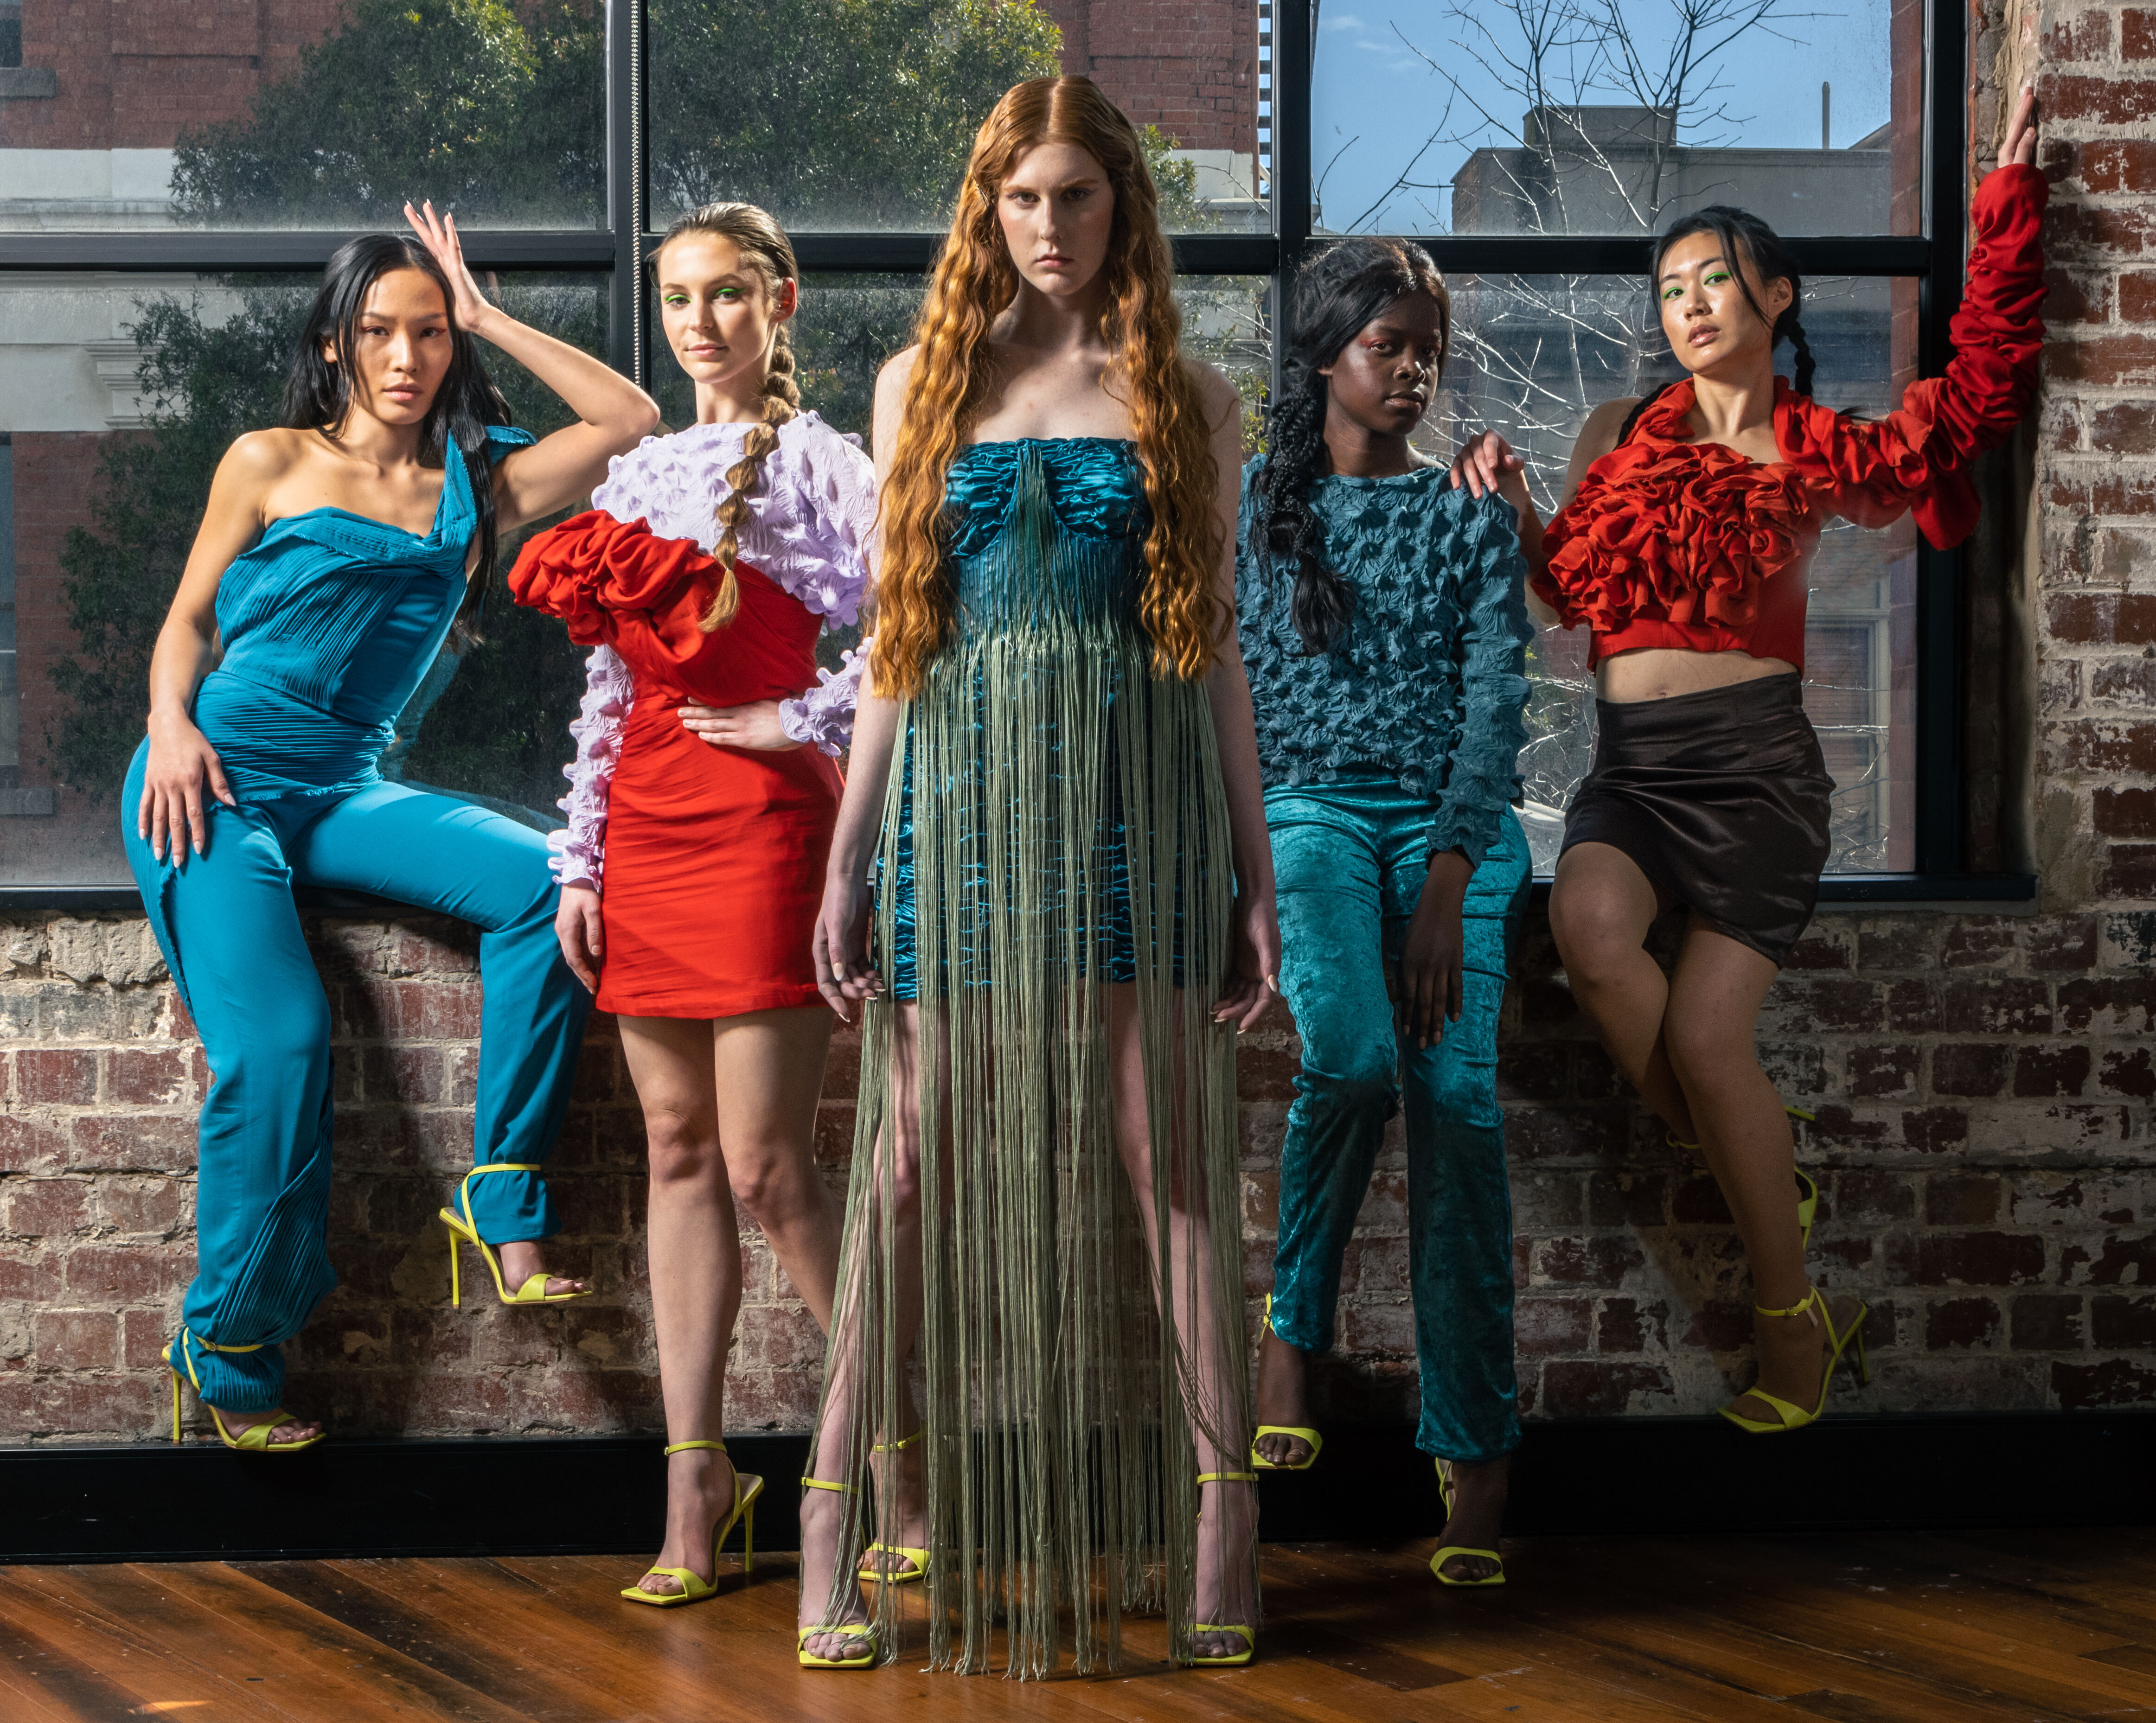 Five models in eclectic attire pose confidently in a loft, showcasing a blend of bold colors and textures against a rustic brick backdrop.